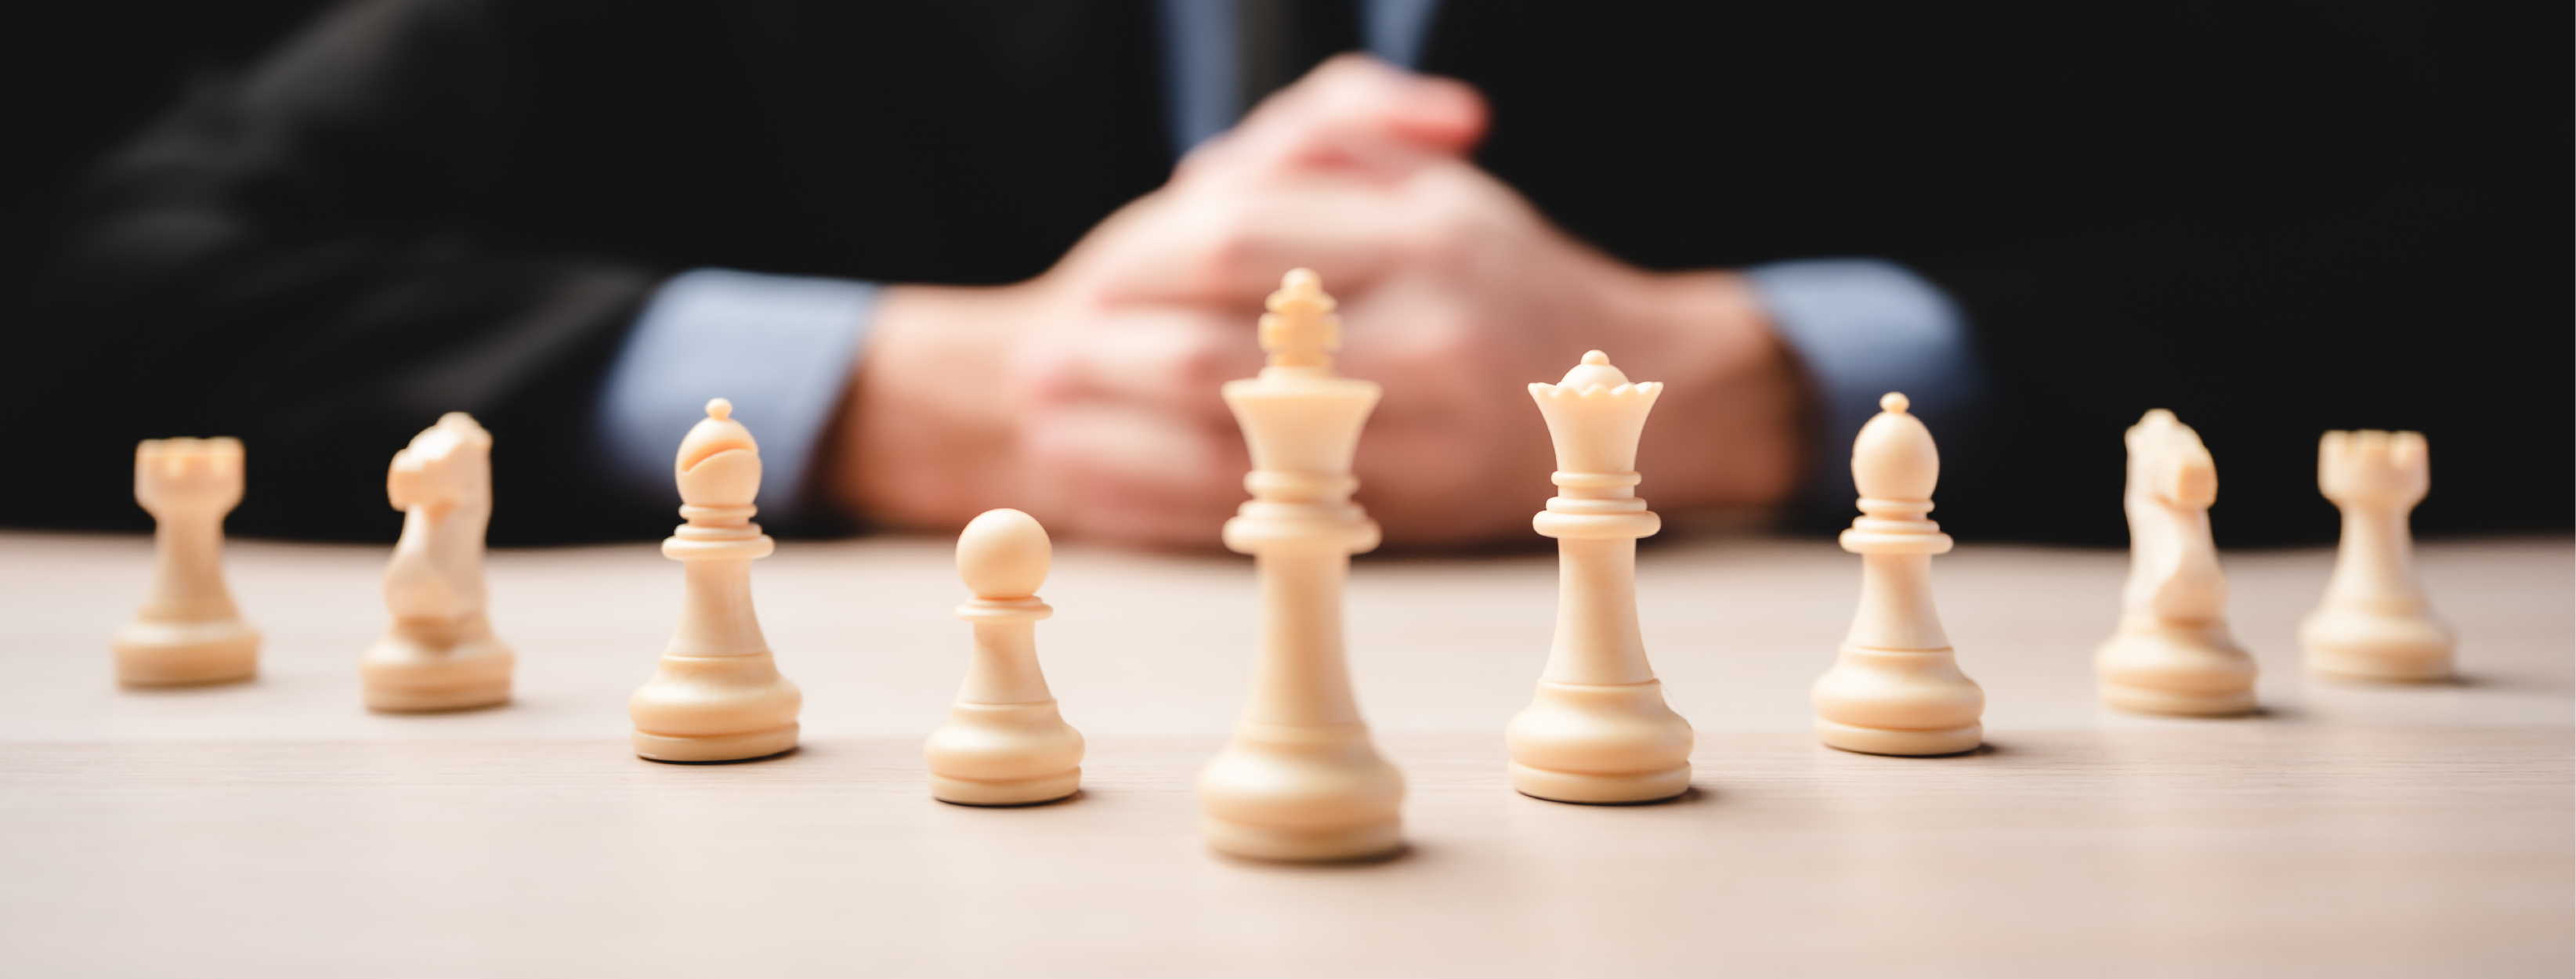 10 Steps For Getting Good At Chess Fast - Chess Forums 